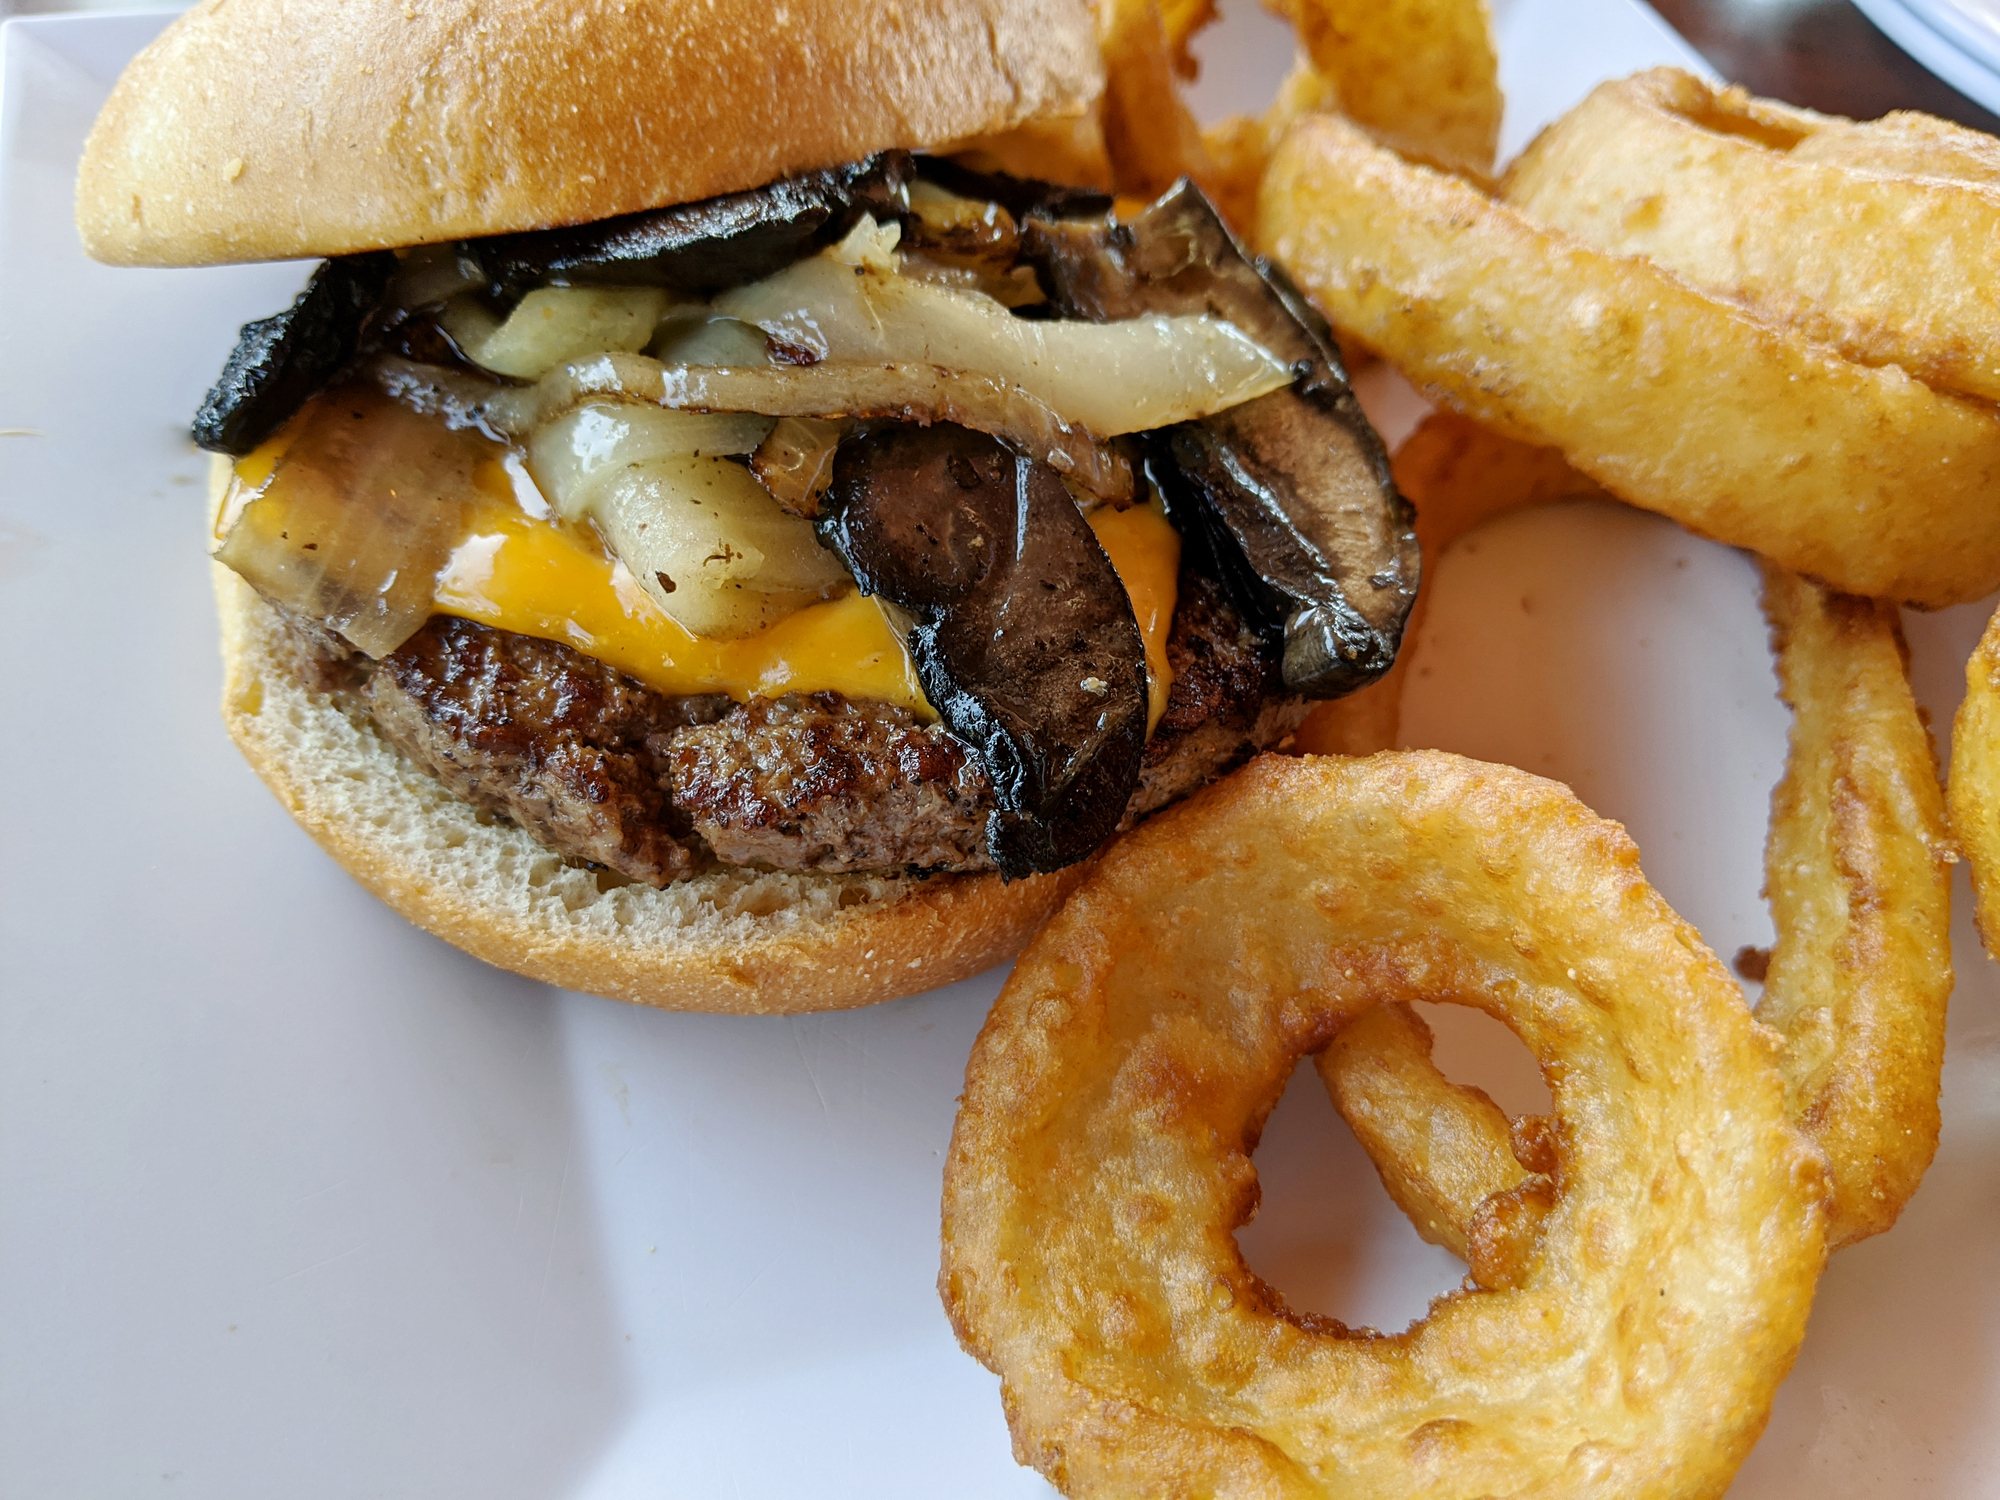 A burger with caramelized onions and mushrooms